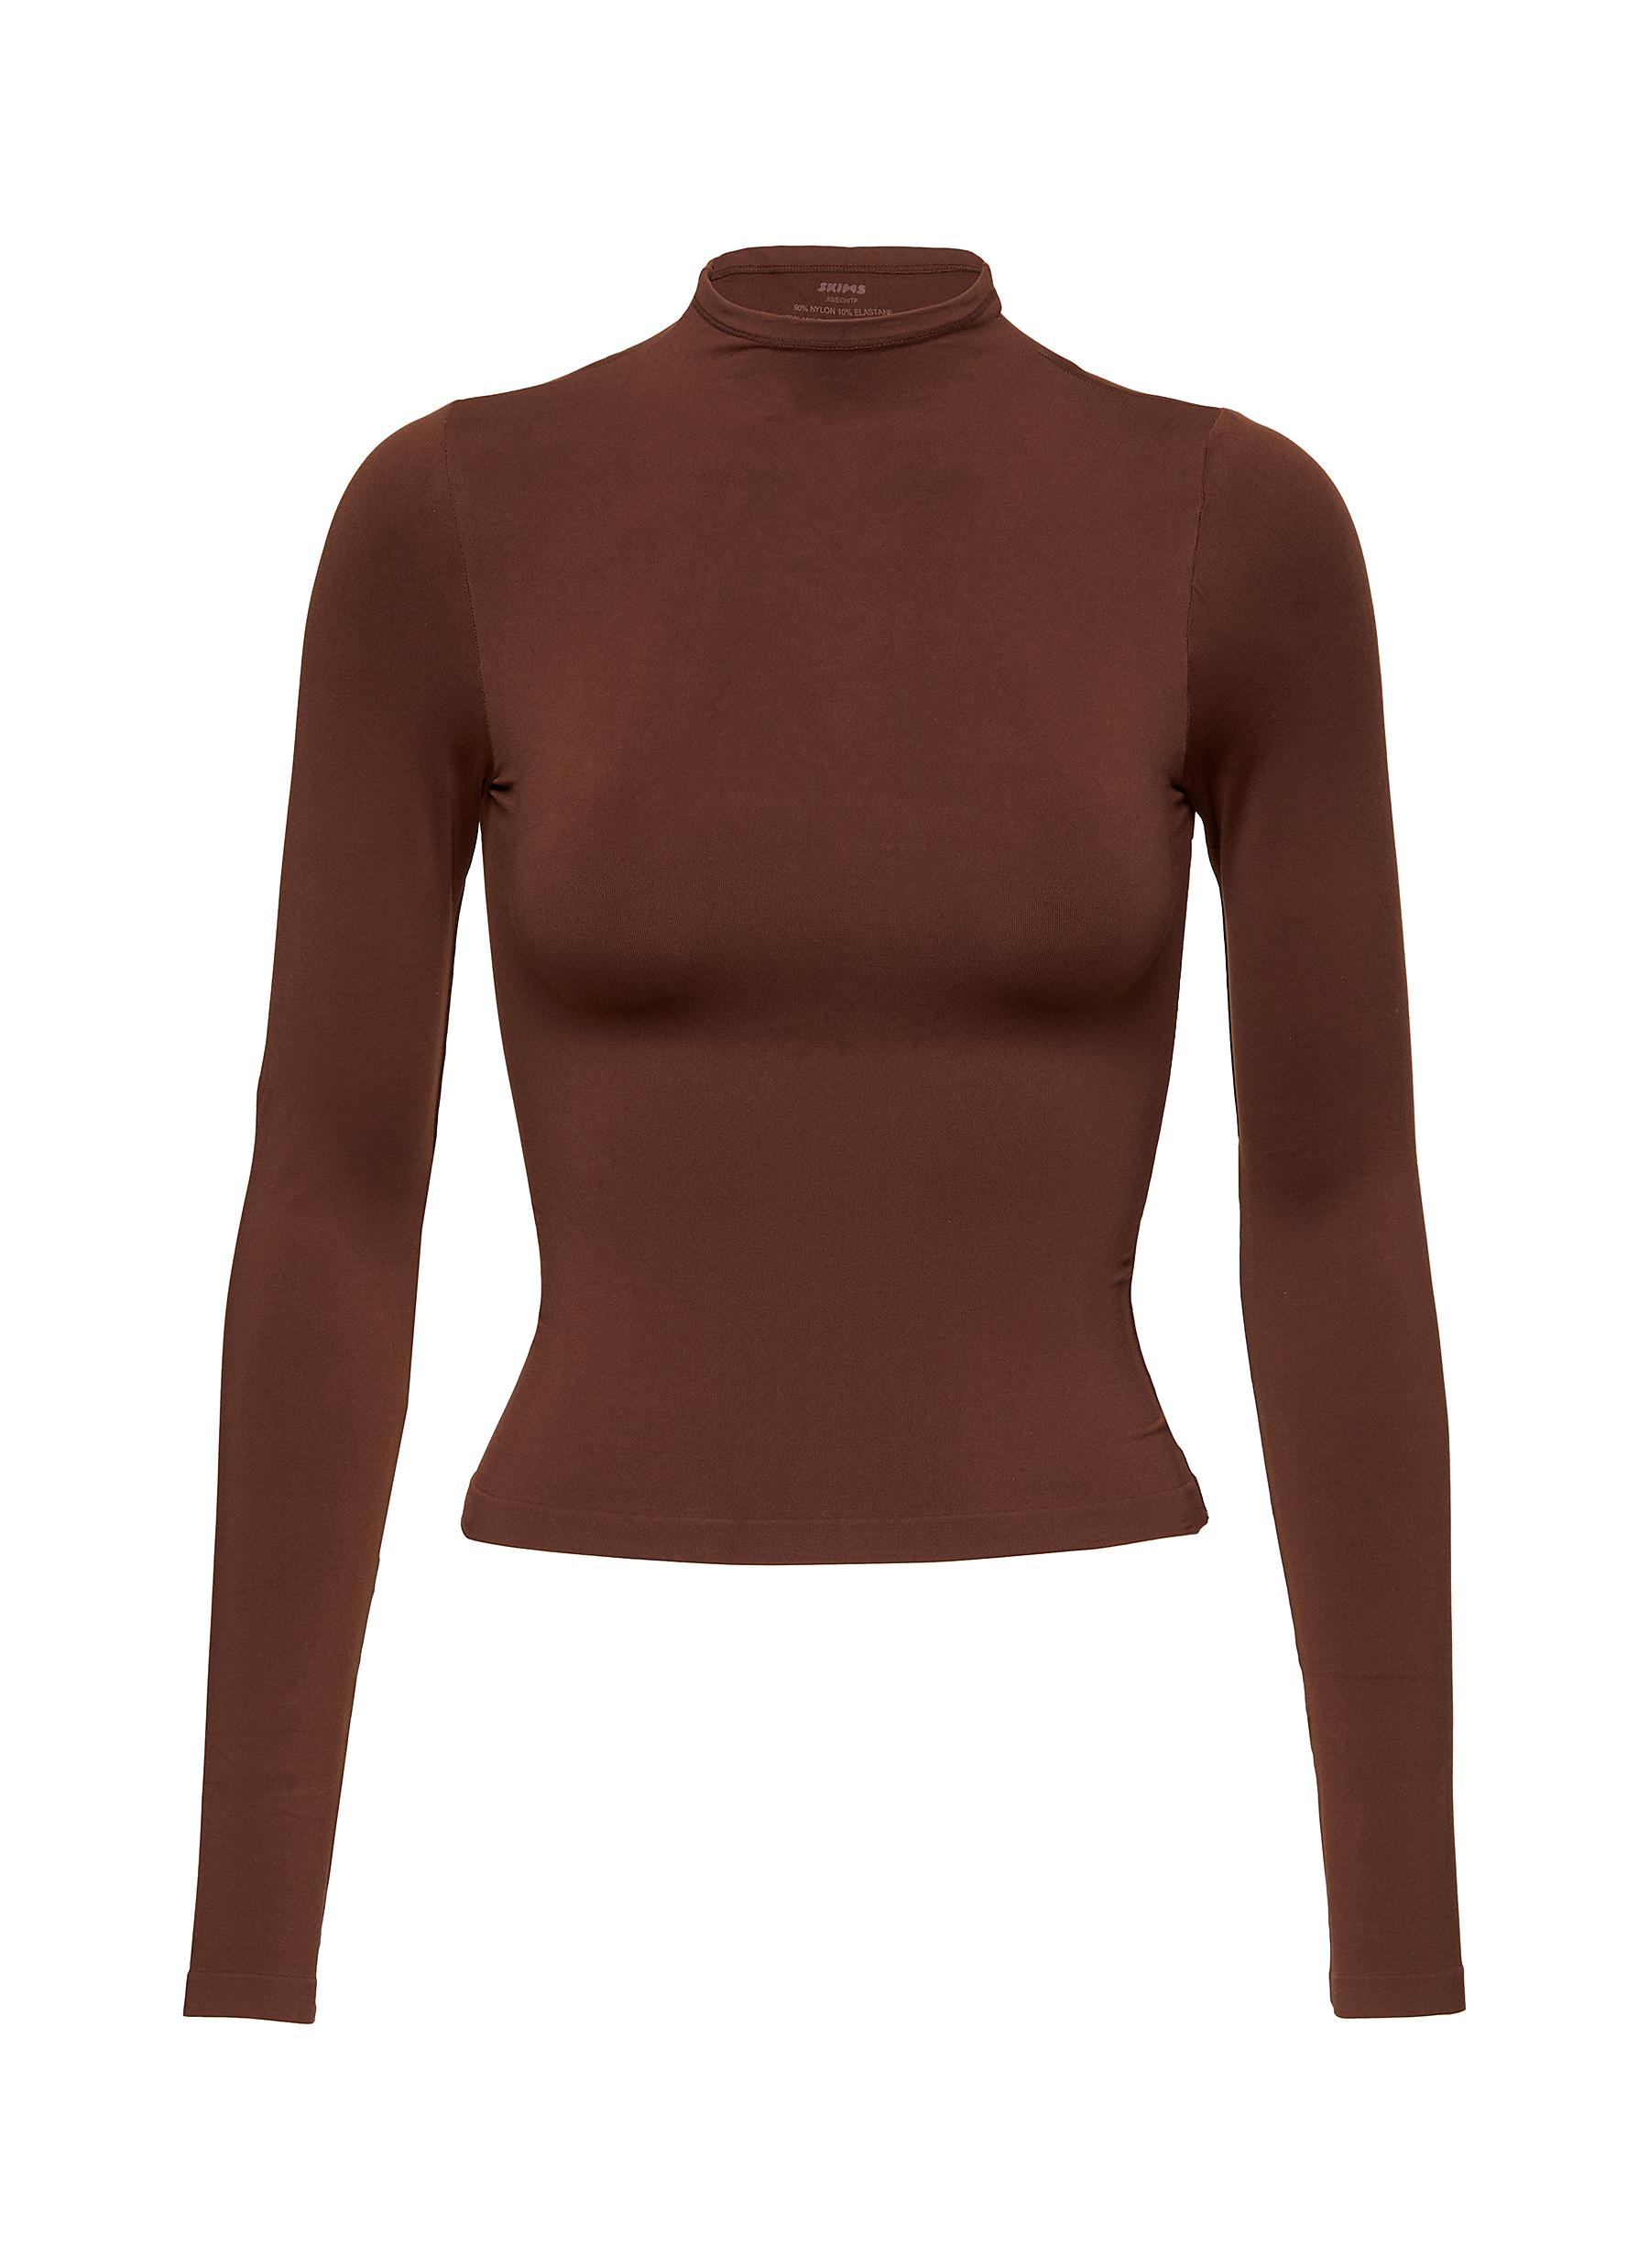 An A-List Turtleneck Is the Only Layer You Need Right Now